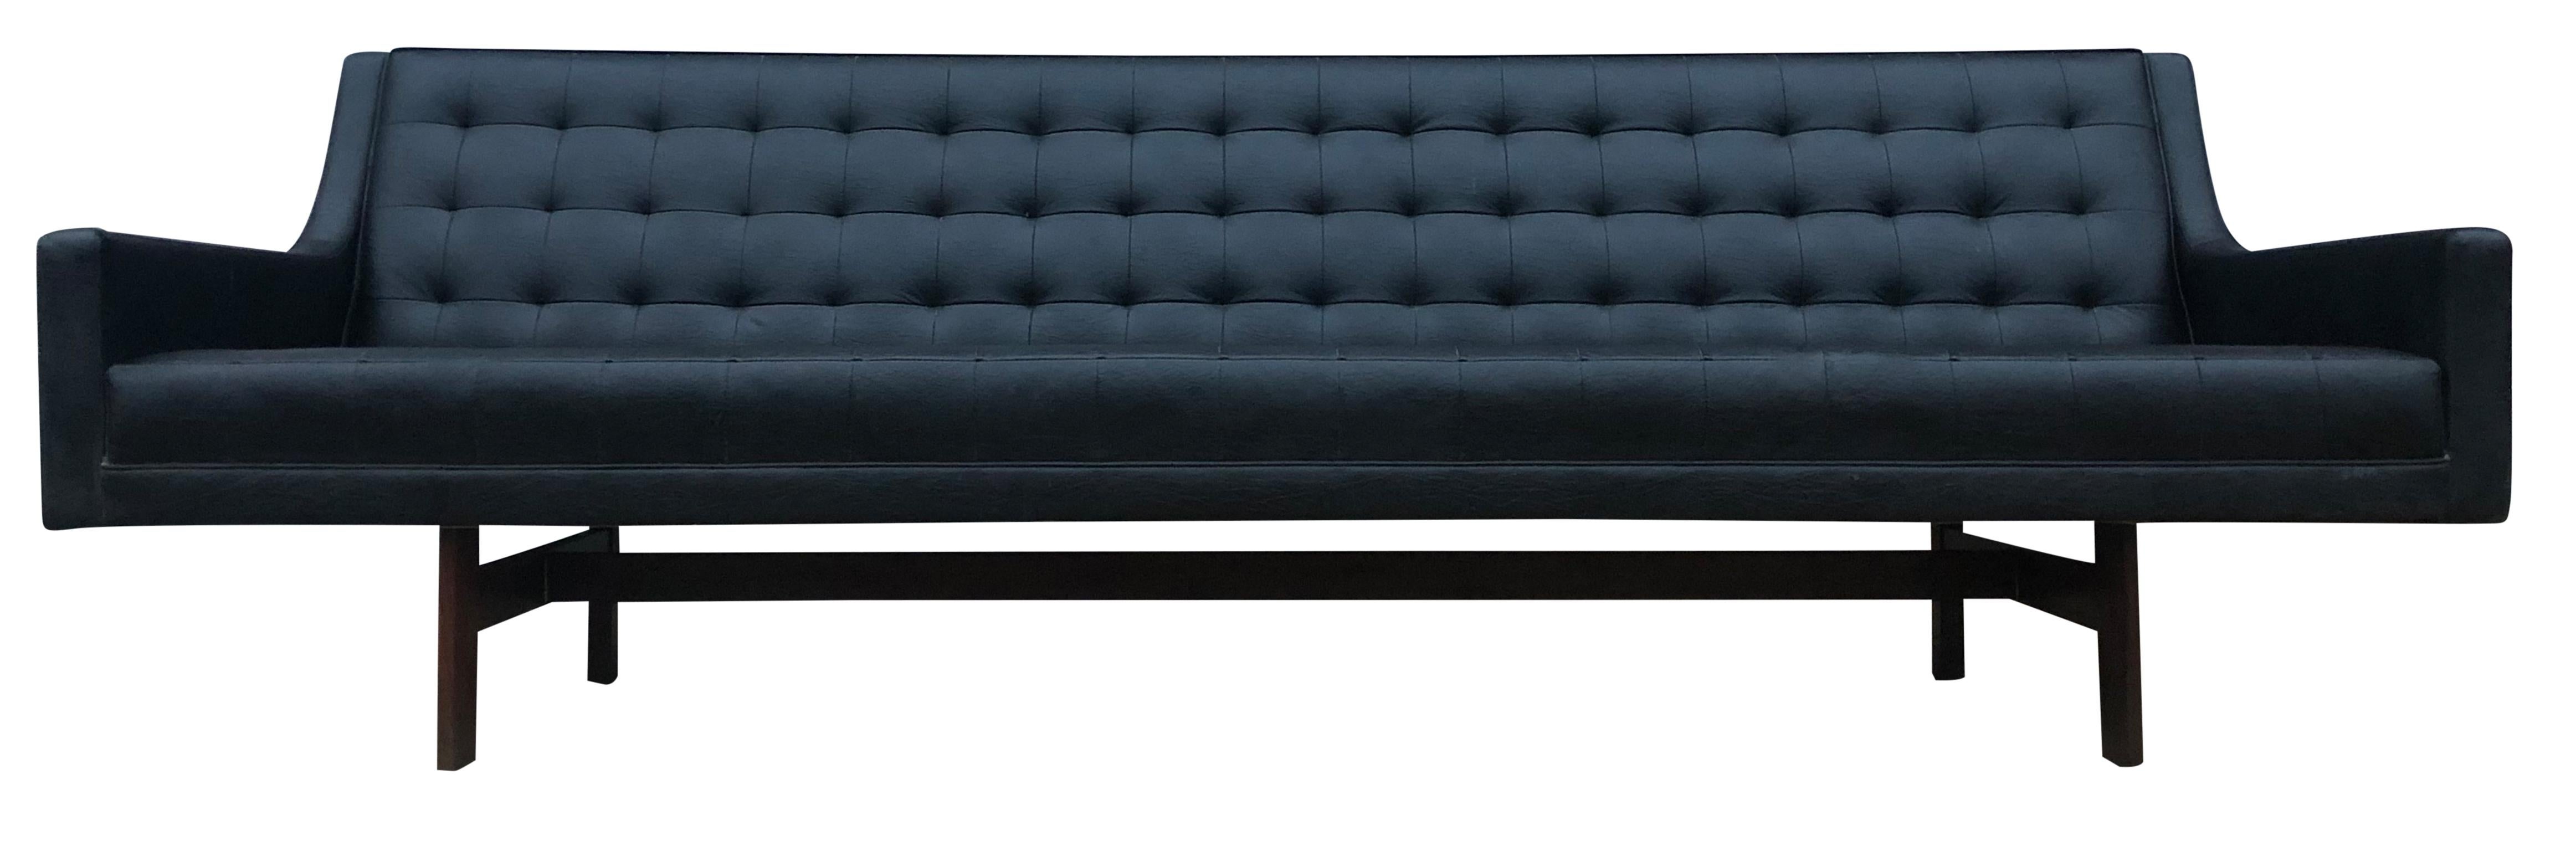 American Midcentury Black Faux Leather Vinyl Tufted Long low Sofa by Patrician